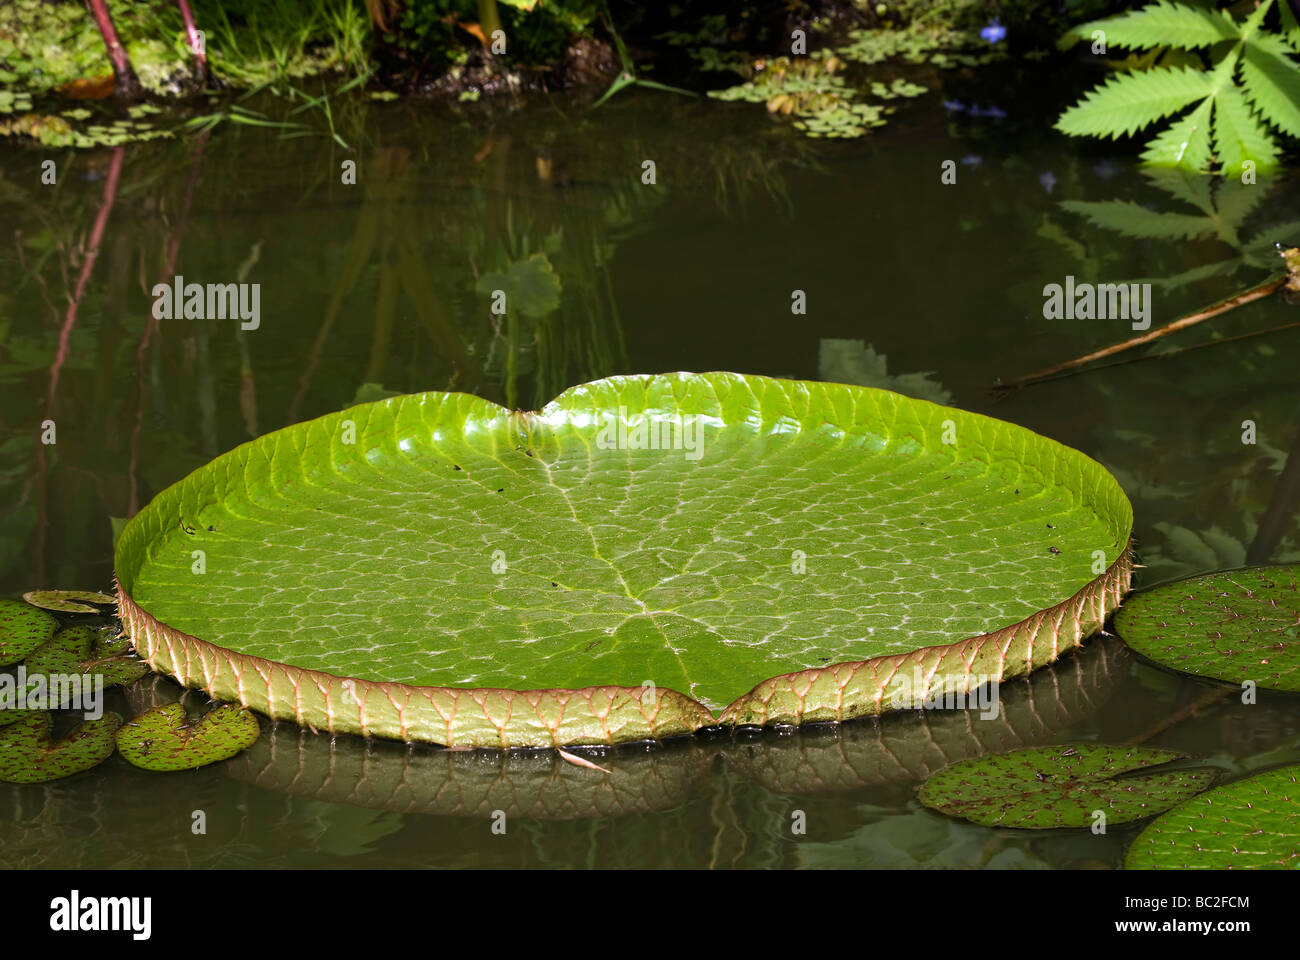 Victoria amazonica a giant lily pad that is the national flower of Guyana taken at the Cotswold Wildlife Park in Oxfordshire England UK Stock Photo